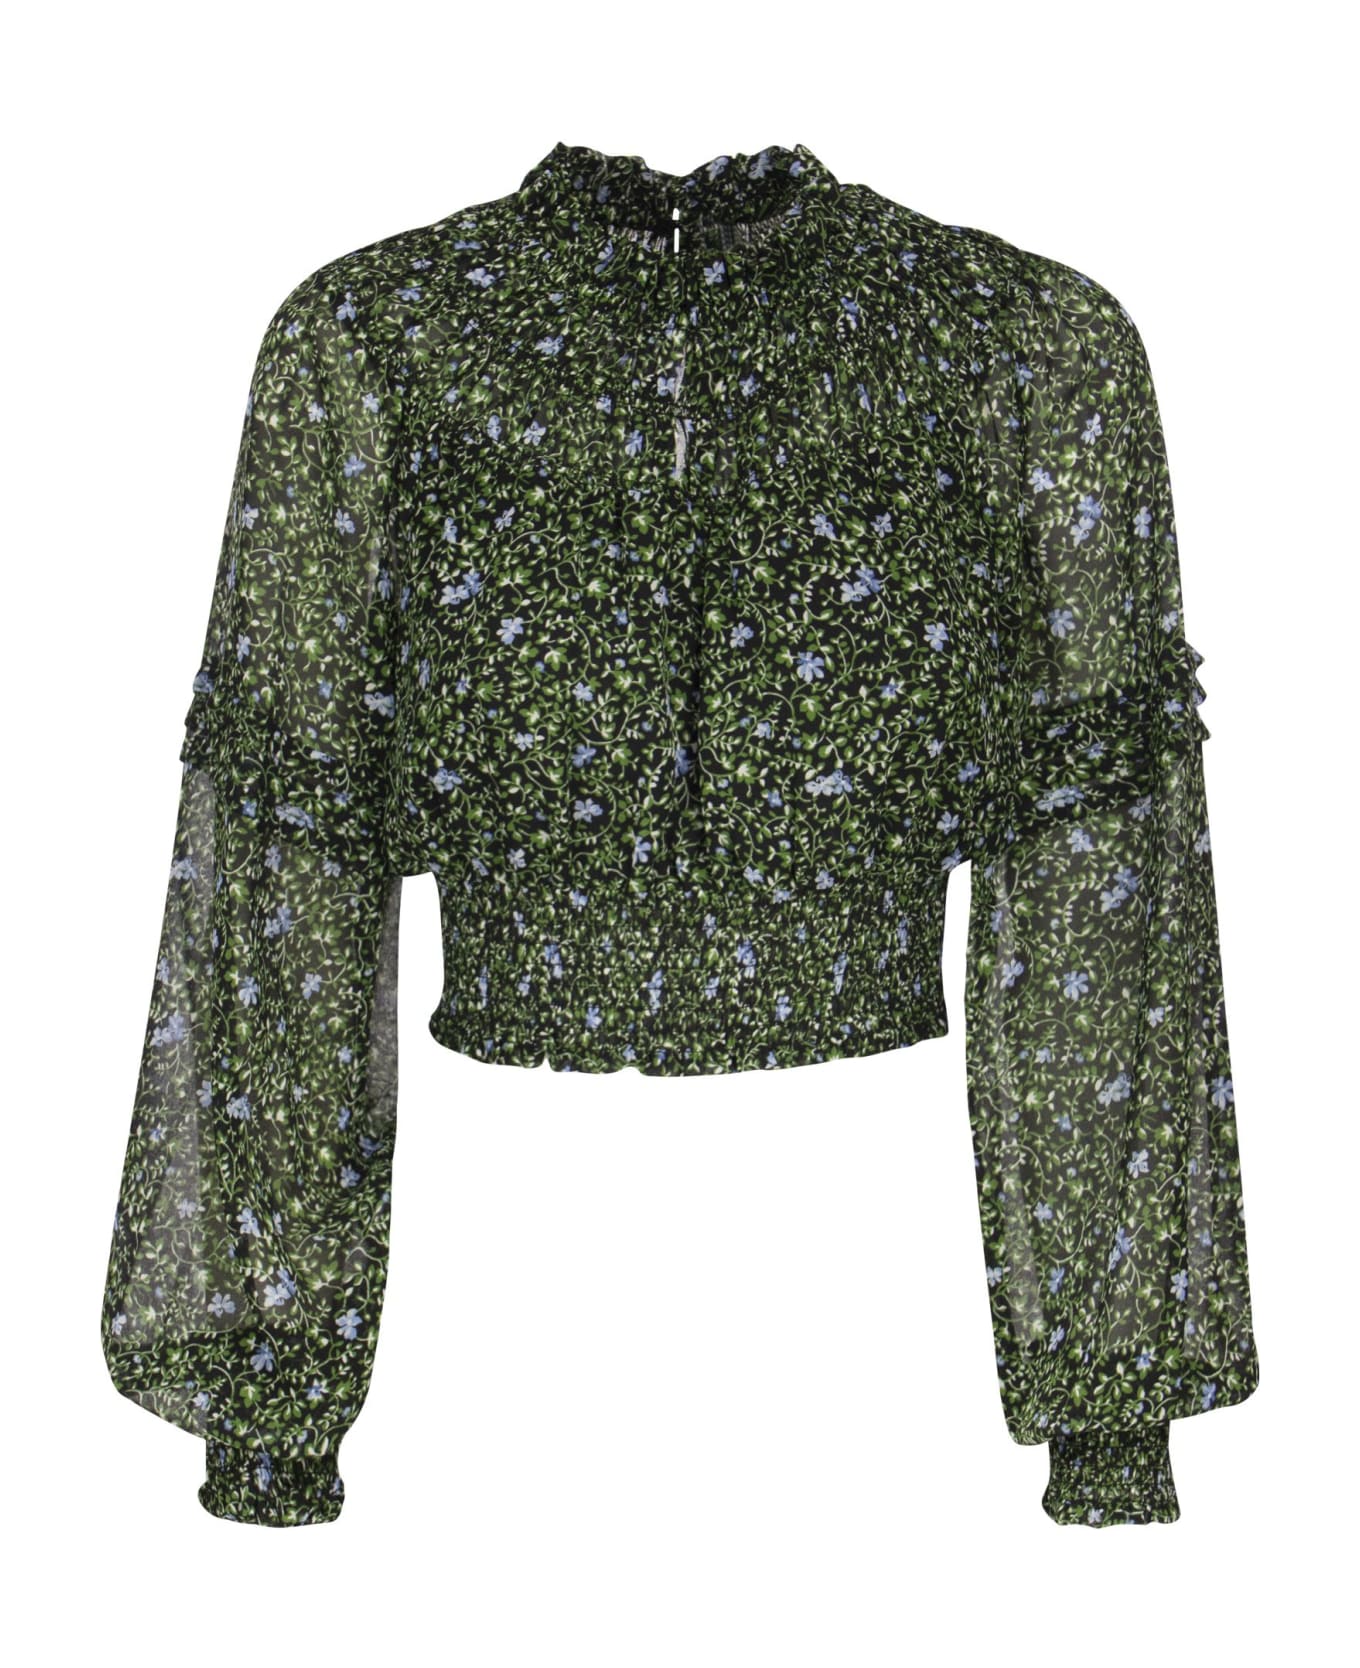 Michael Kors Georgette Blouse With Smock Stitch And Floral Print - Green